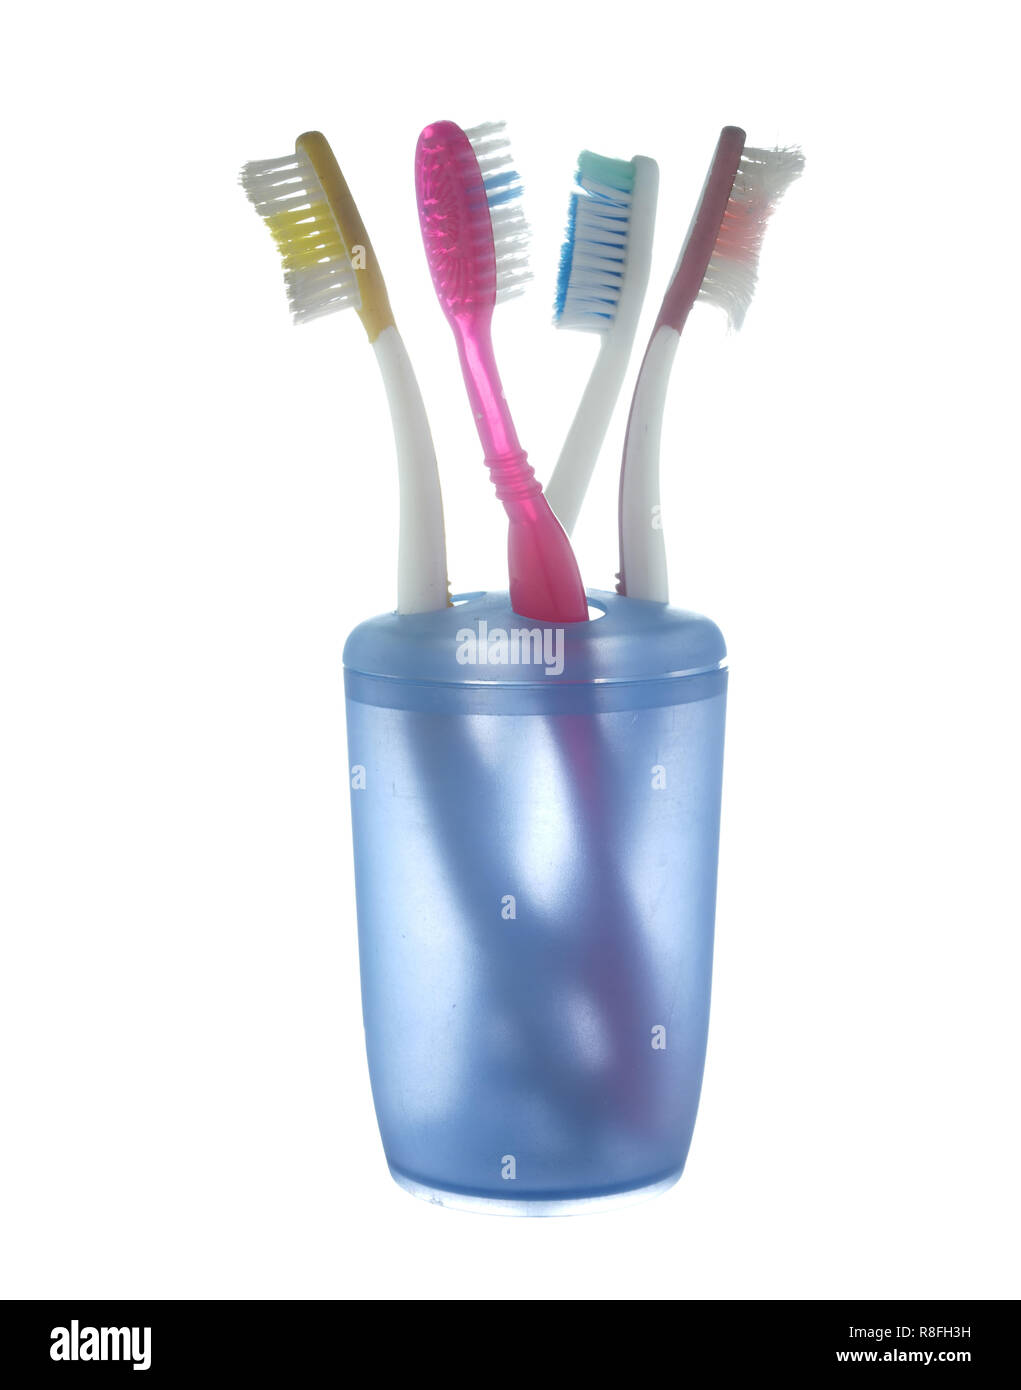 Variety of toothbrushes in a plastic glass isolated on white background. Stock Photo